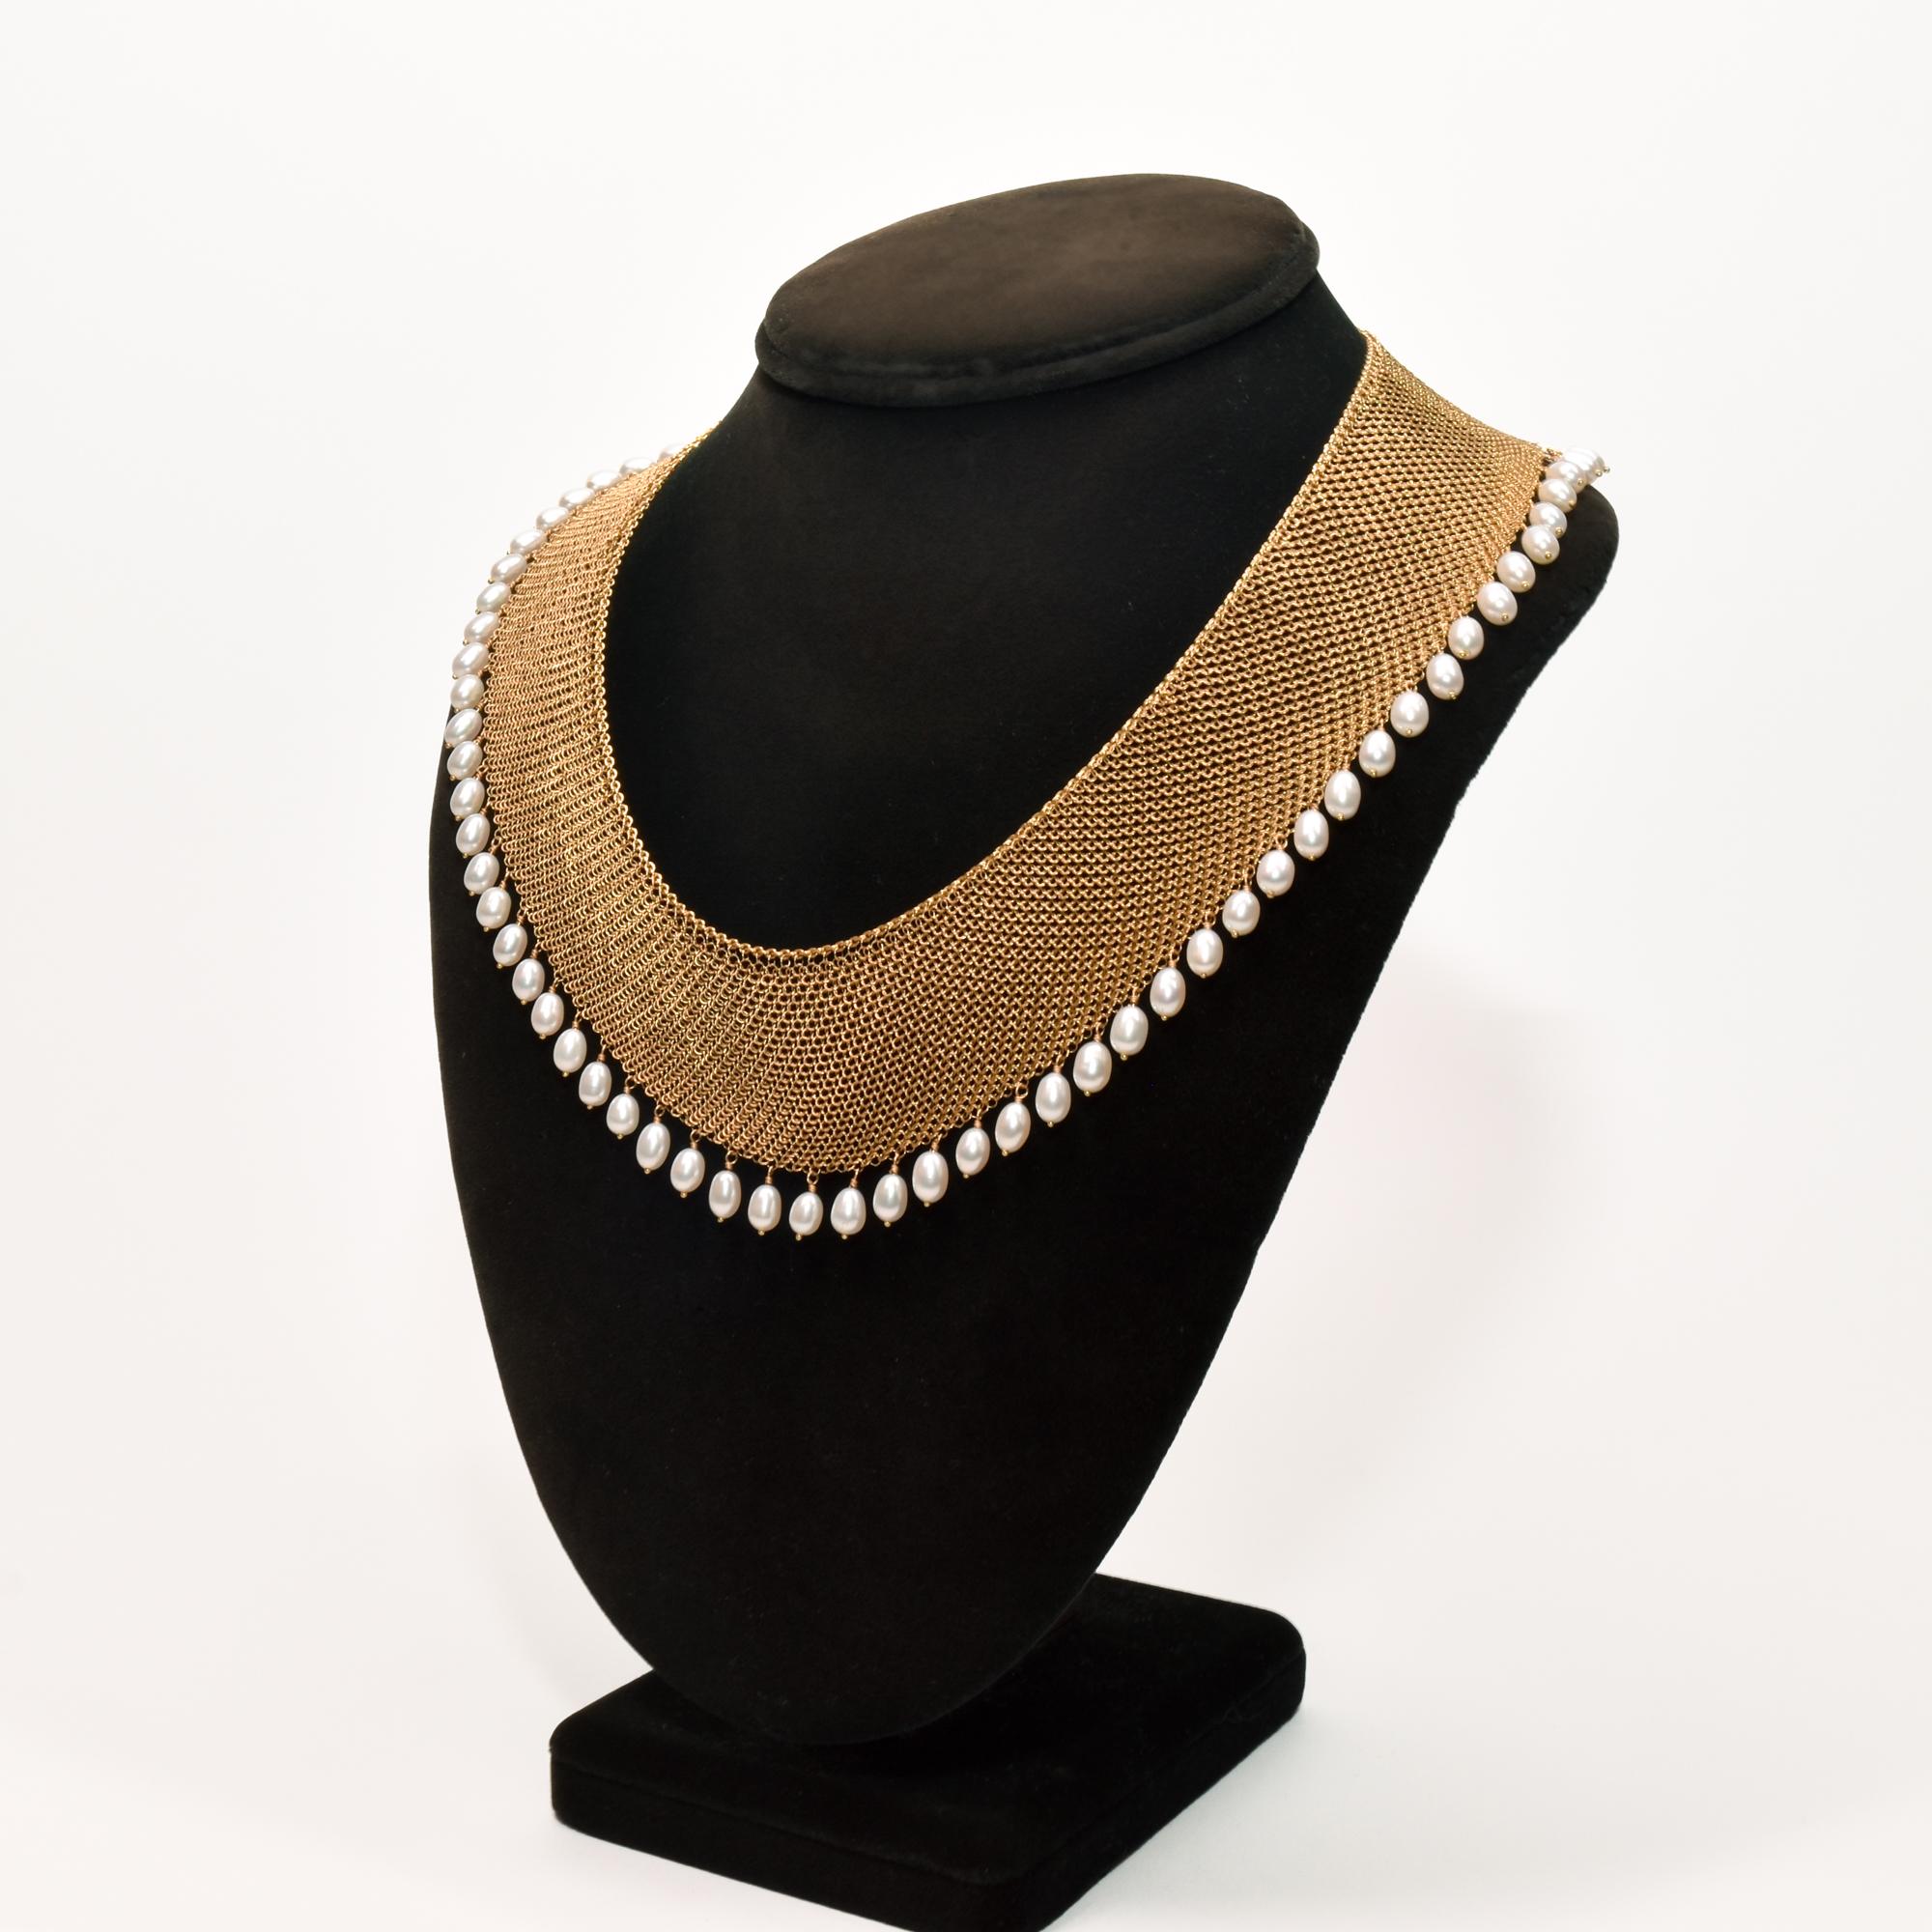 A breathtaking 18K yellow gold mesh pearl bib necklace designed by Elsa Peretti for Tiffany & Co. Features a stunning chainmail collar detailed with a fringe of 57 pearls. The necklace drapes beautifully along the decolletage and secures with an